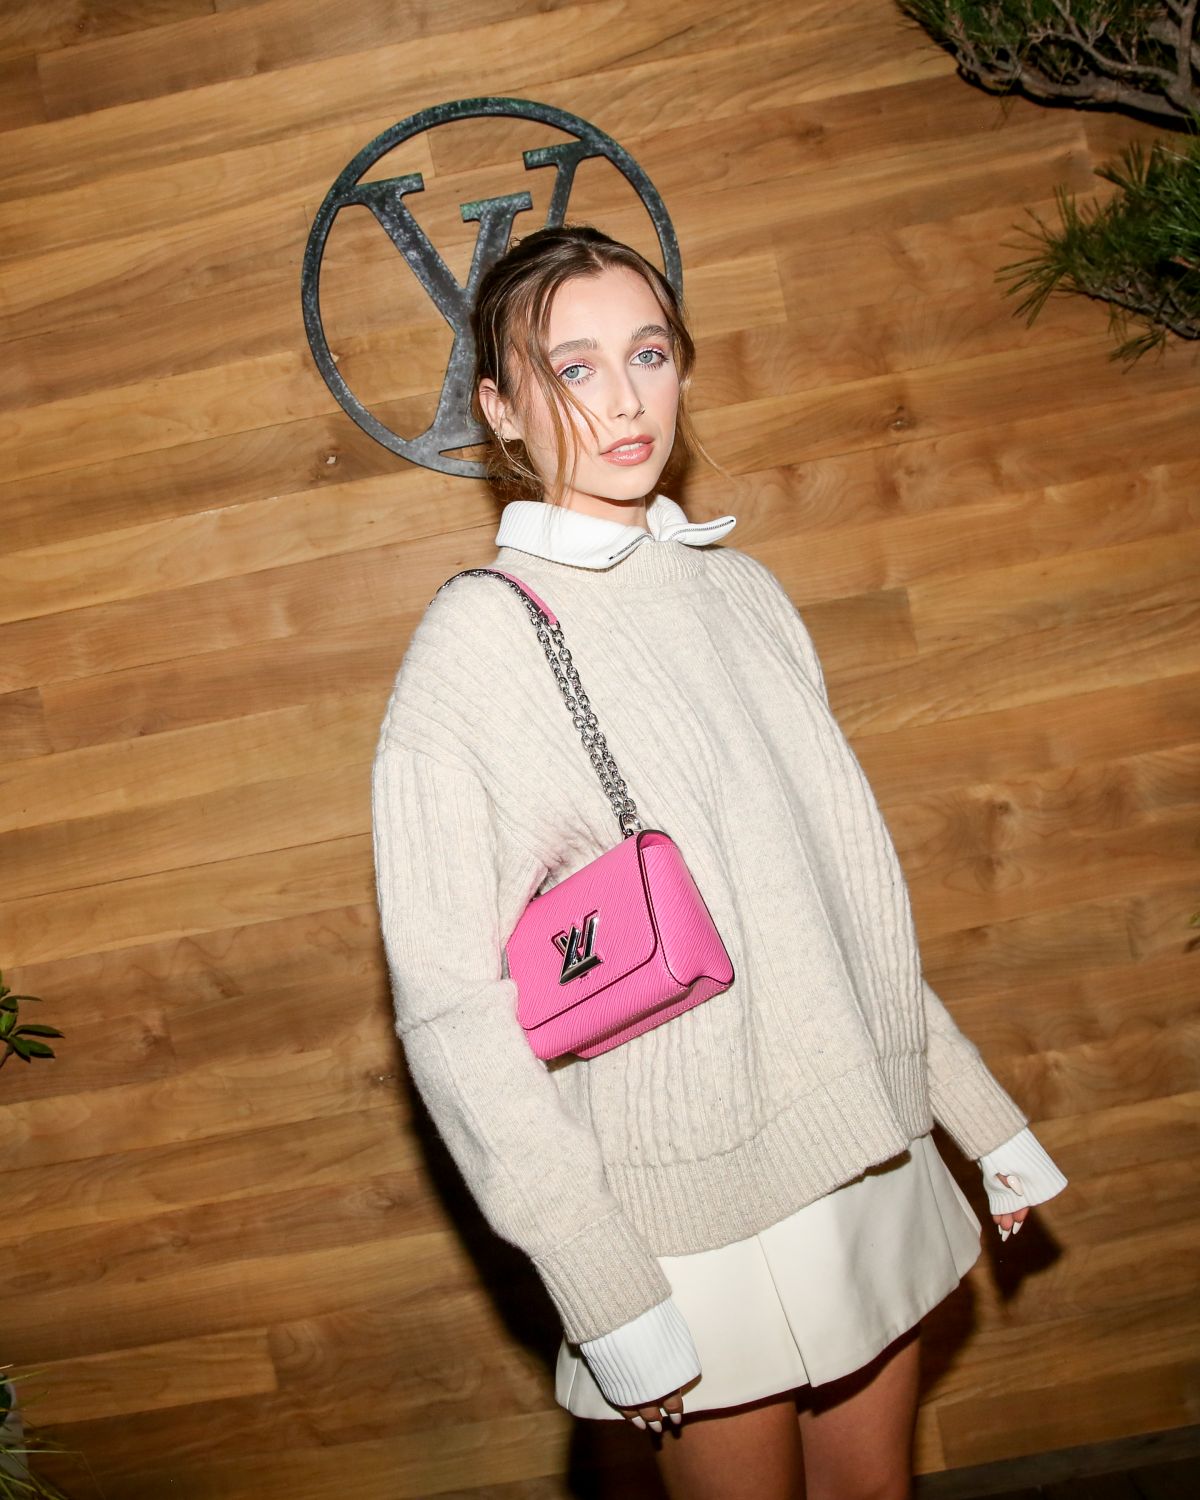 Emma Chamberlain at Louis Vuitton and Nicolas Ghesquiere celebrate an  evening with friends in Malibu / id 